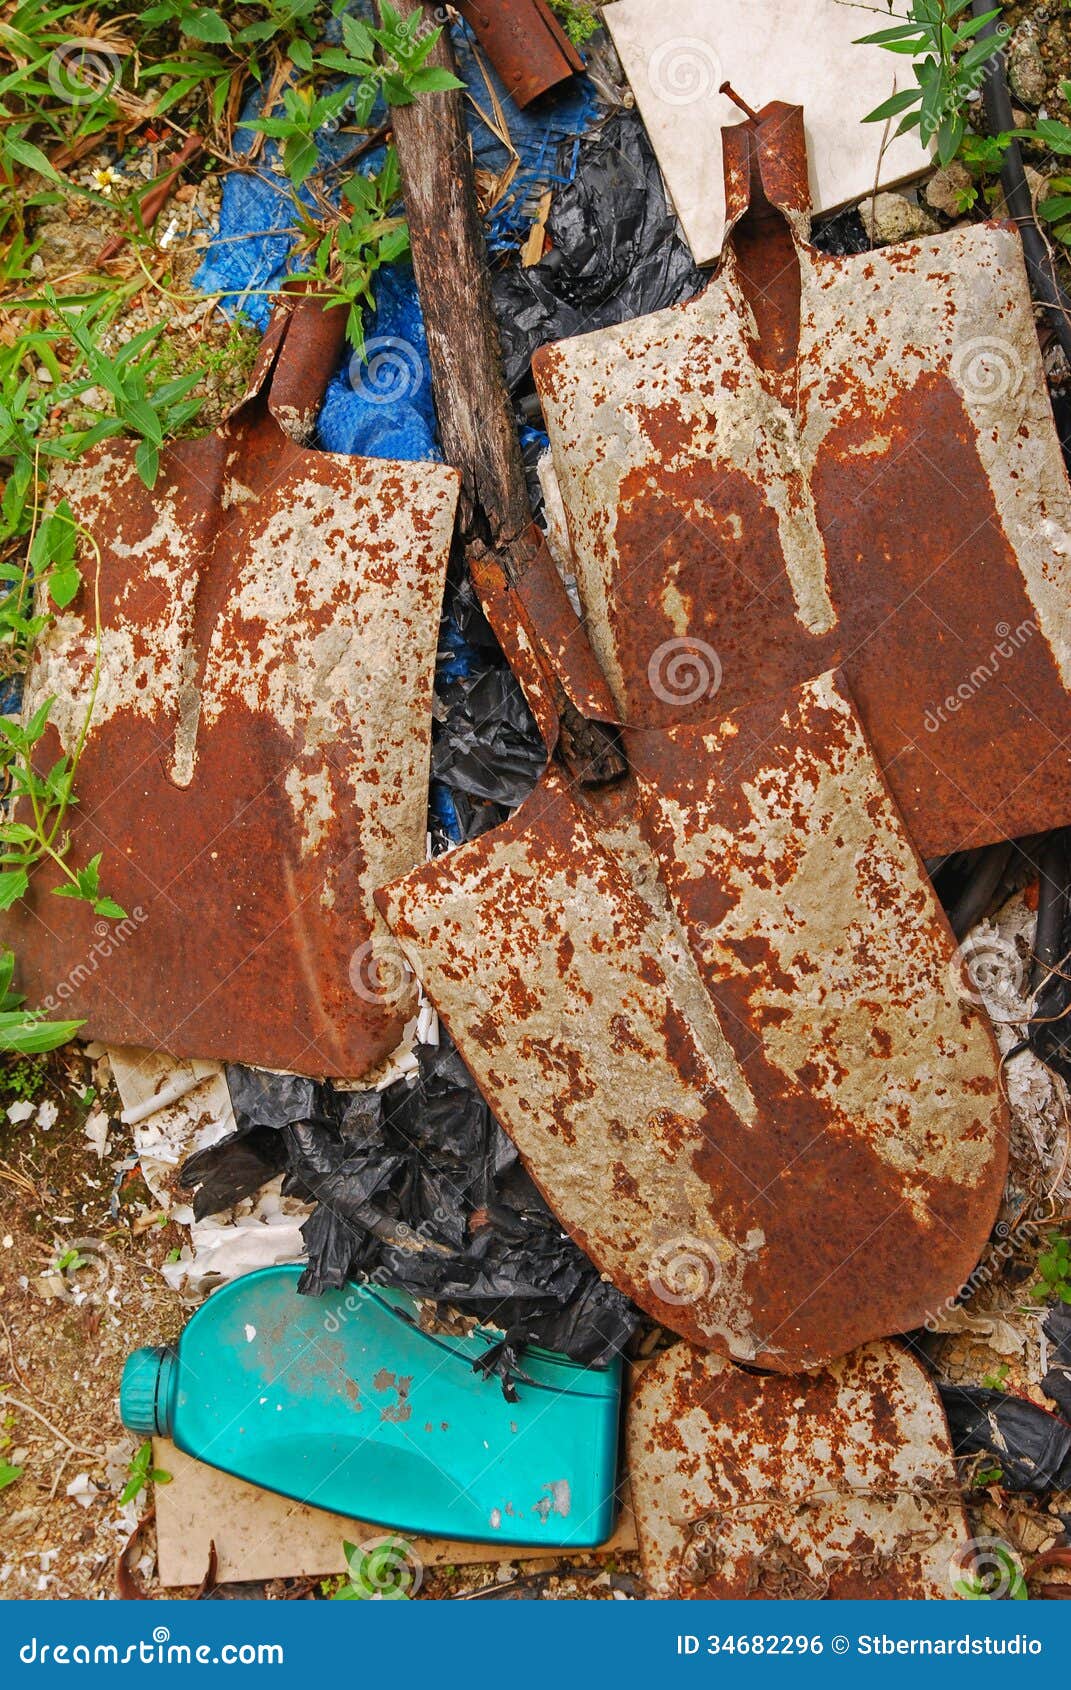 Unwanted Old Items At Home Outdoor Garden Royalty Free Stock Image ...